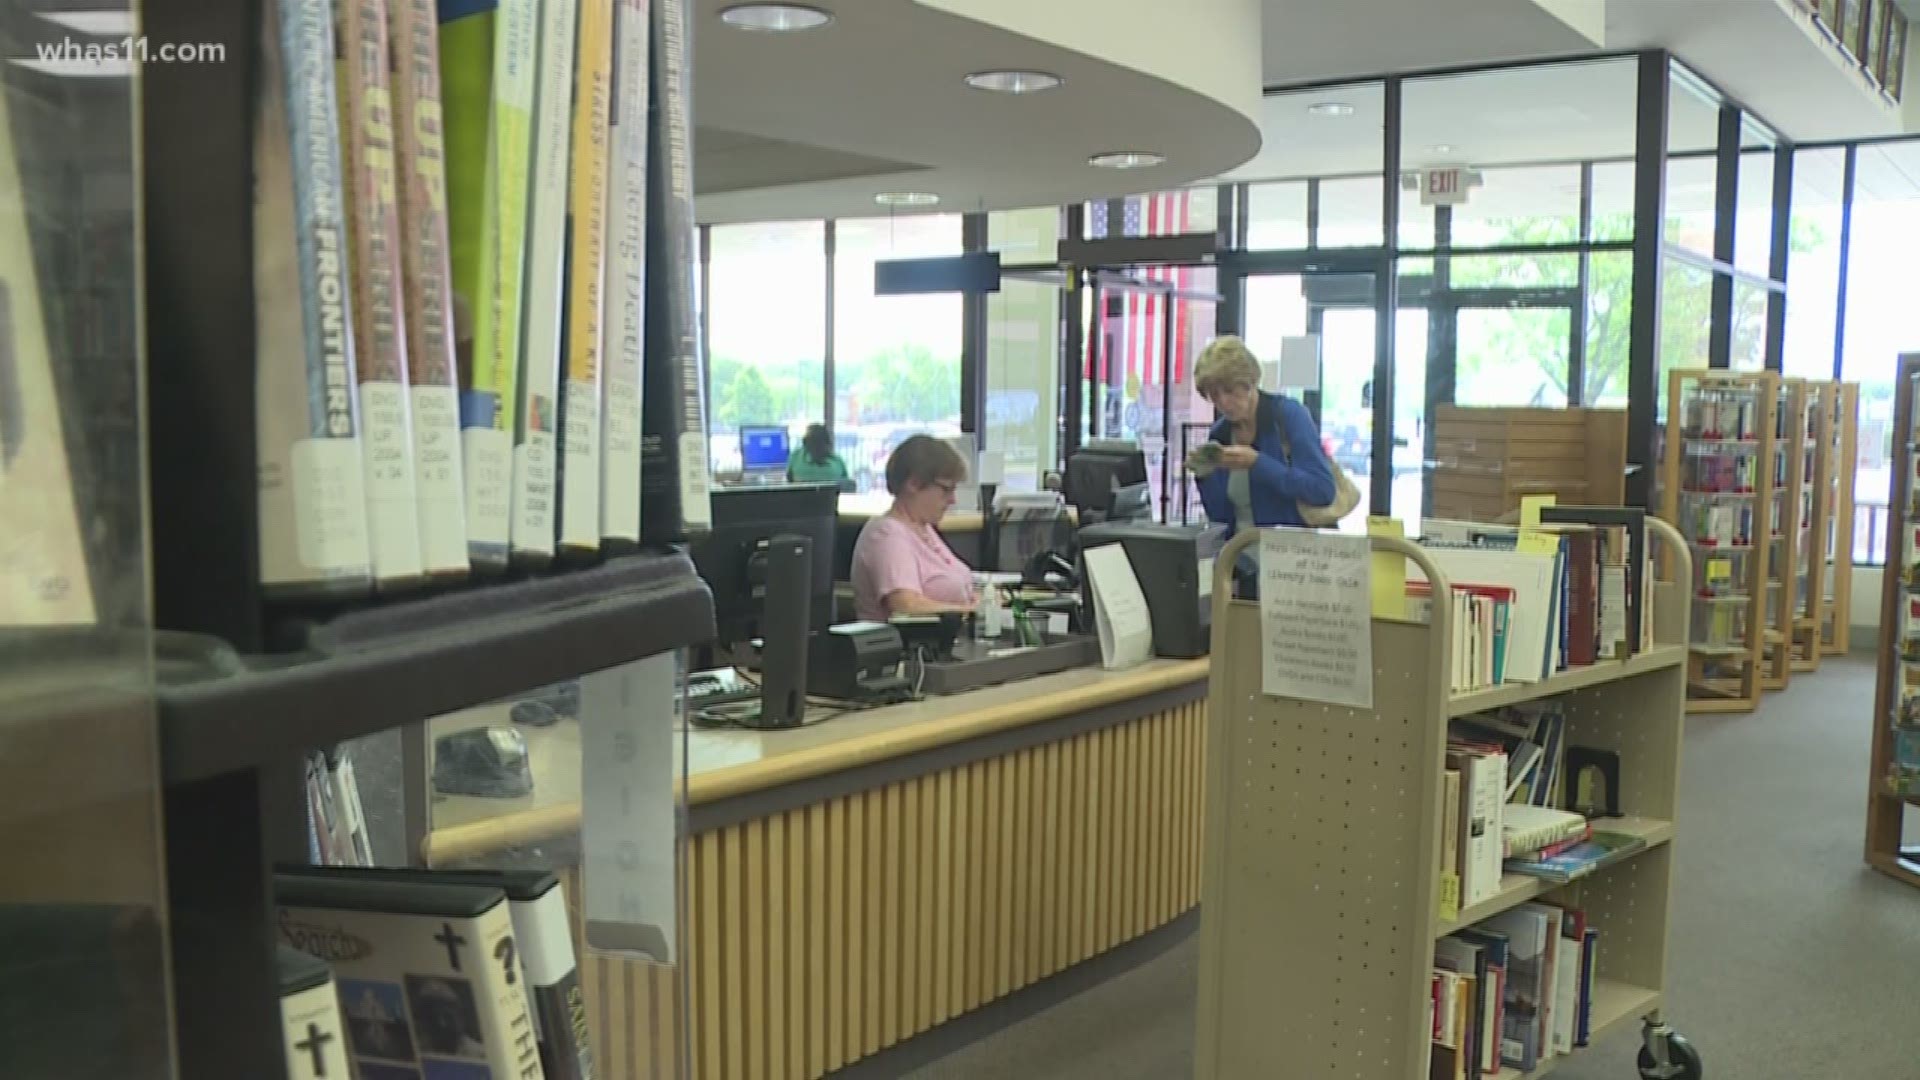 As looming budget cuts are slashing away at public libraries, Haylie Mingoue shows us, why the Fern Creek Library is a staple in the community.